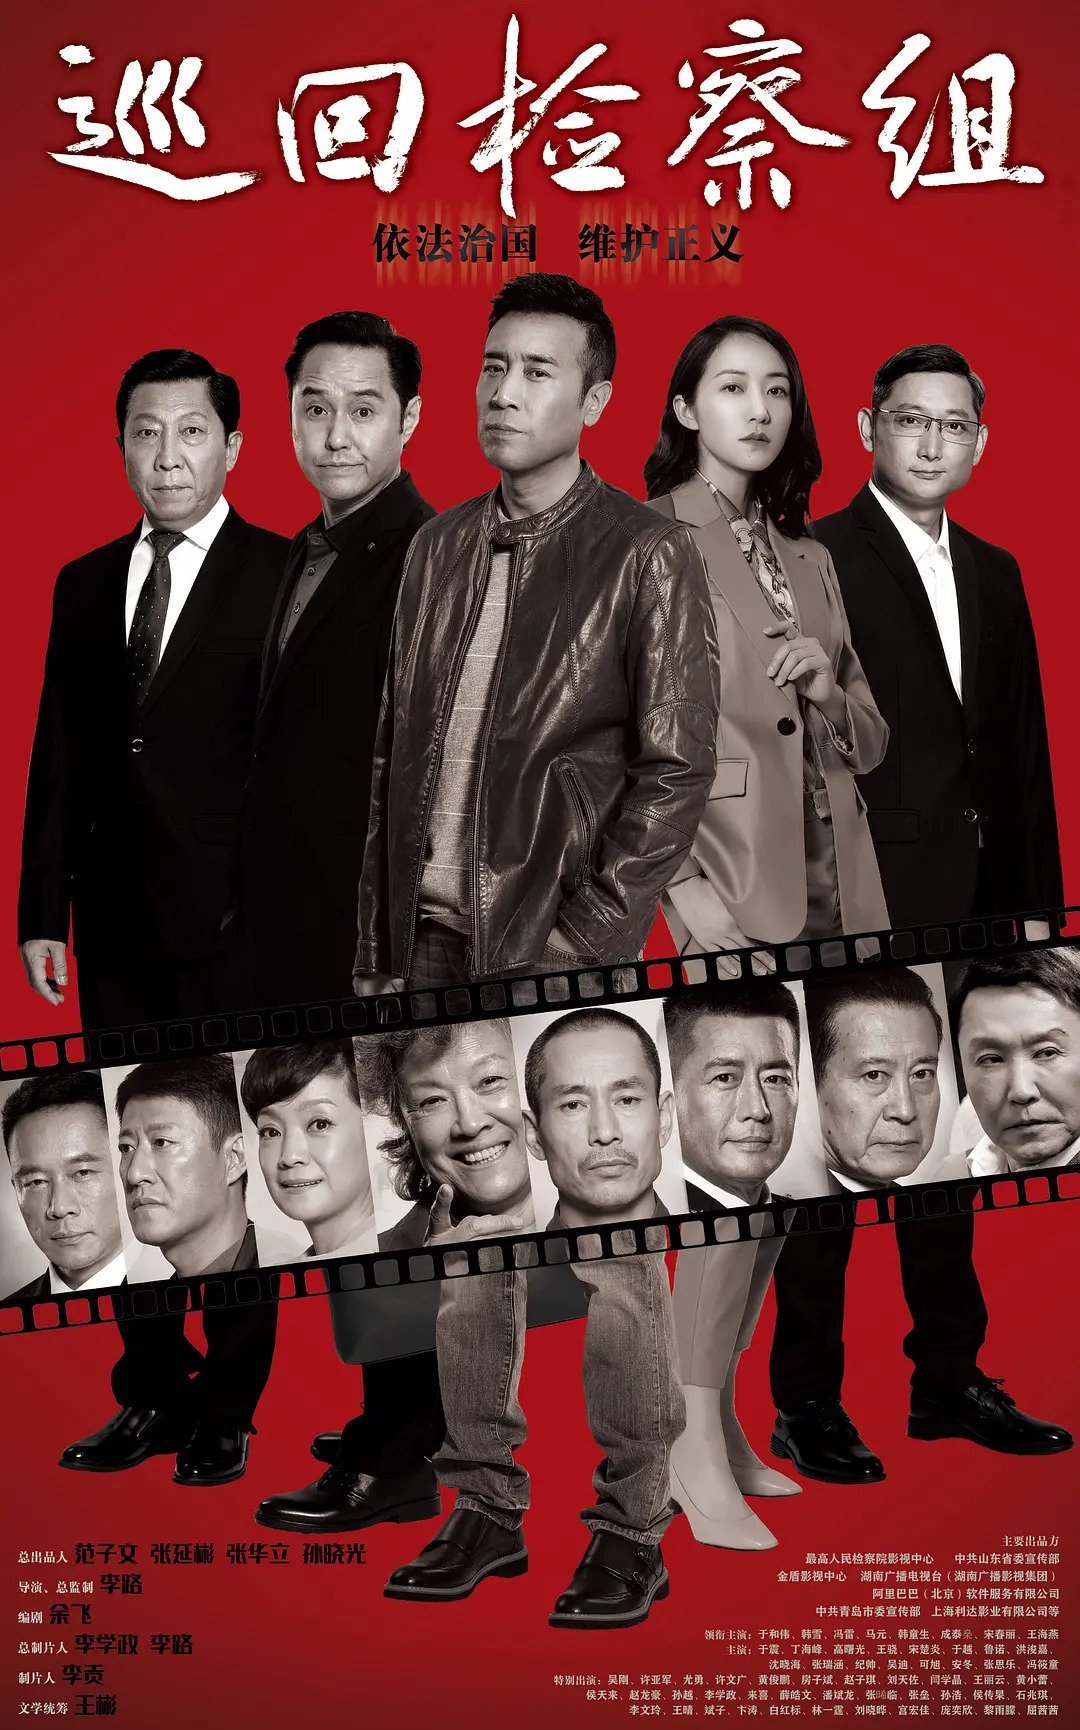 The justice chinese drama